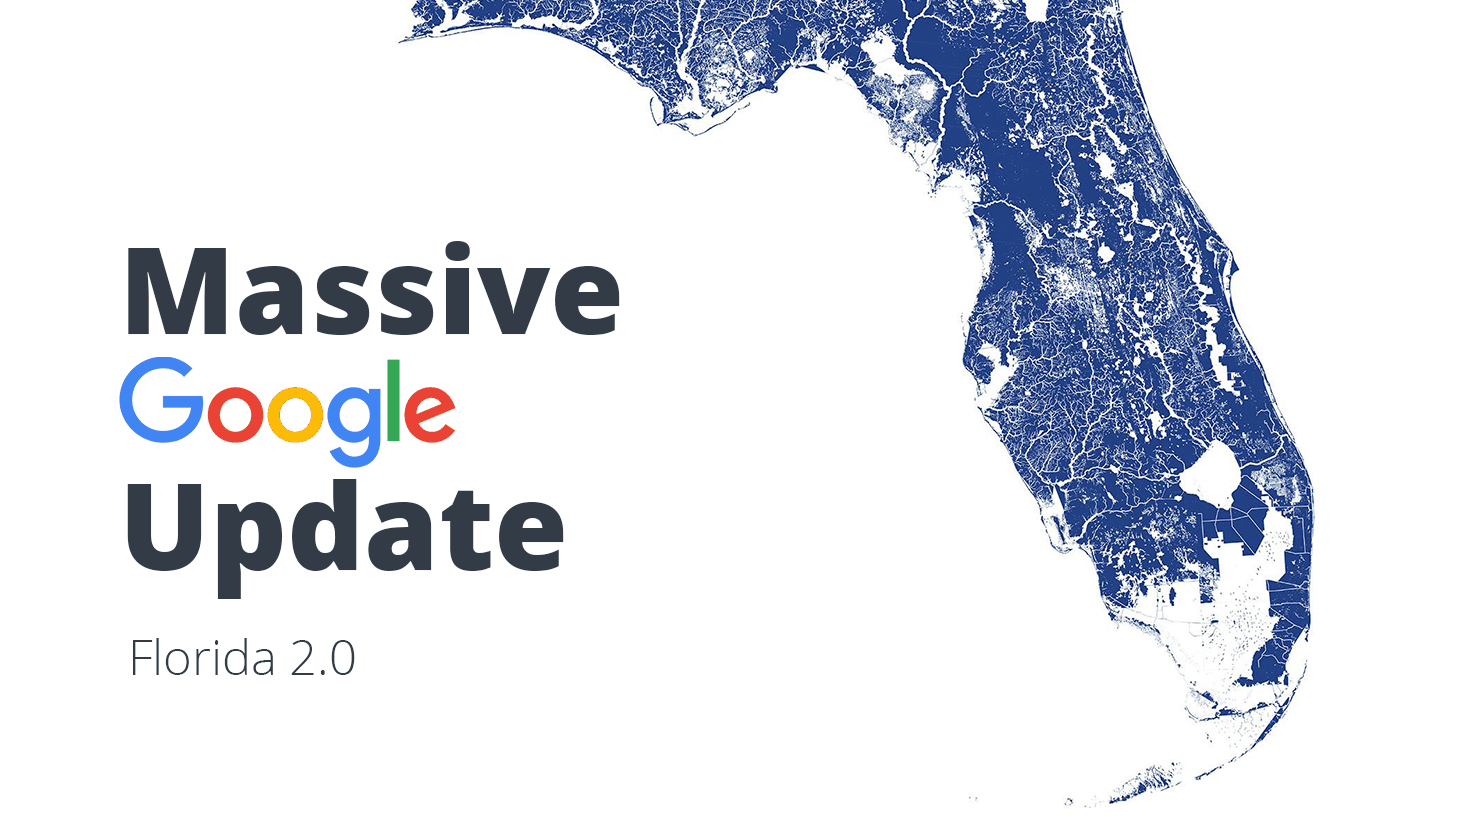 how massive was the march brand core update